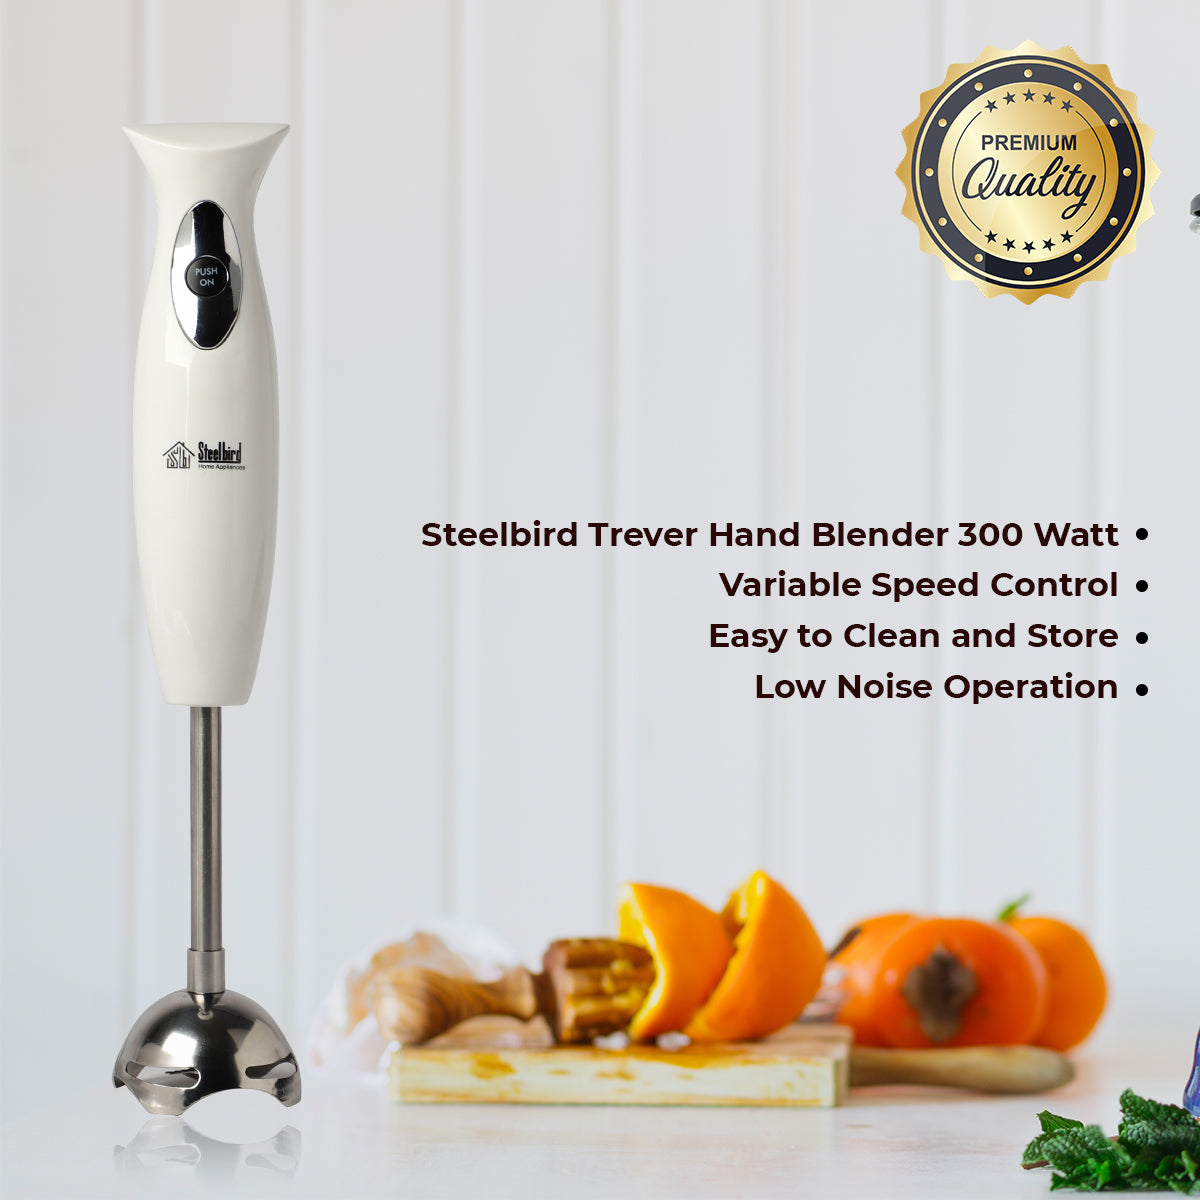 Steelbird Trever Hand Blender 300 Watt Variable Speed Control Easy to Clean and Store Low Noise Operation (White)…